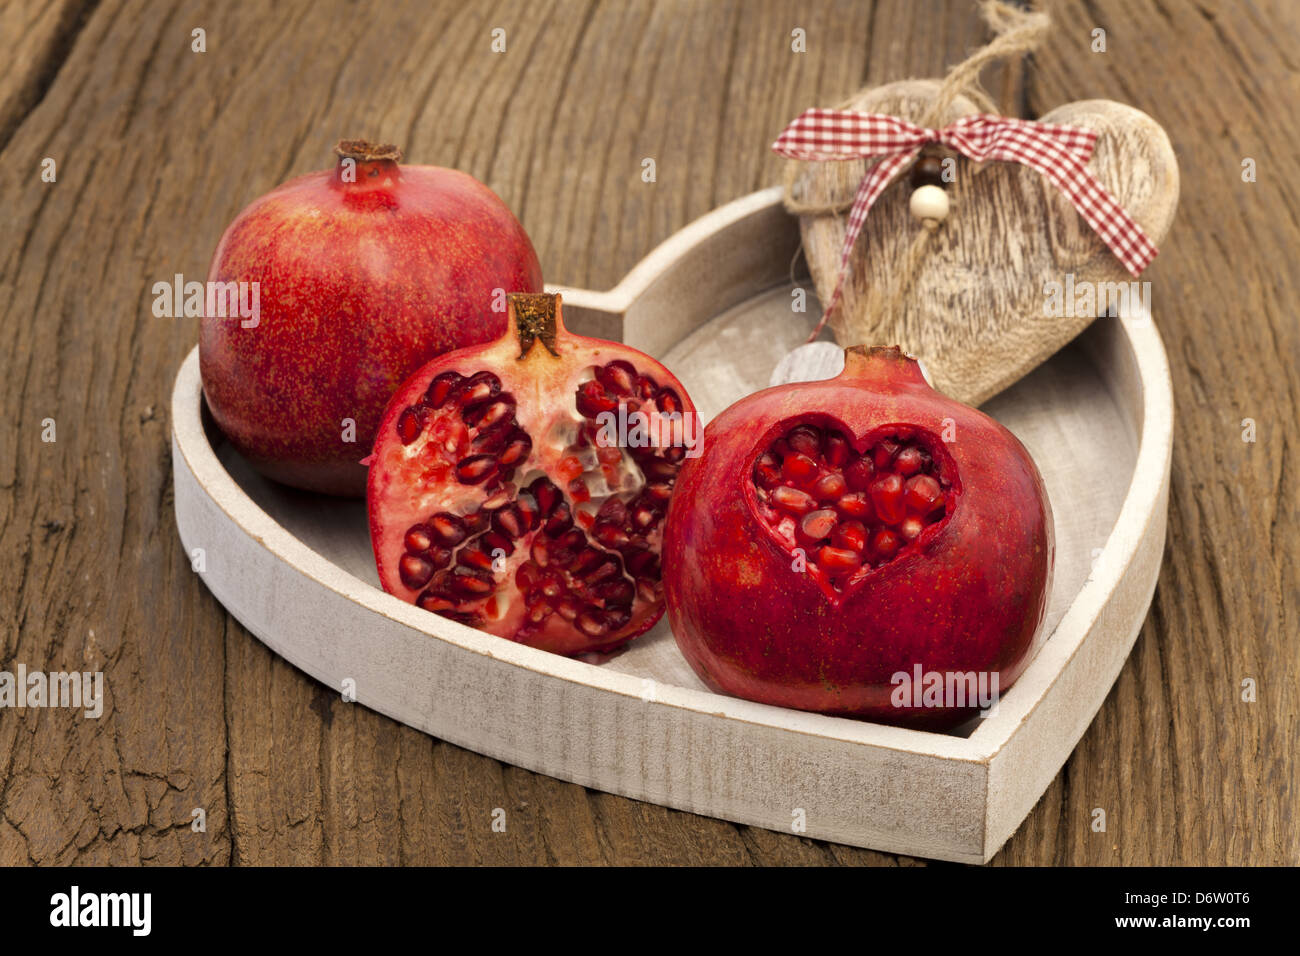 Two whole and one half pomegranate on a tray with a wooden heart, a pomegranate with a heart-shaped cutout Stock Photo